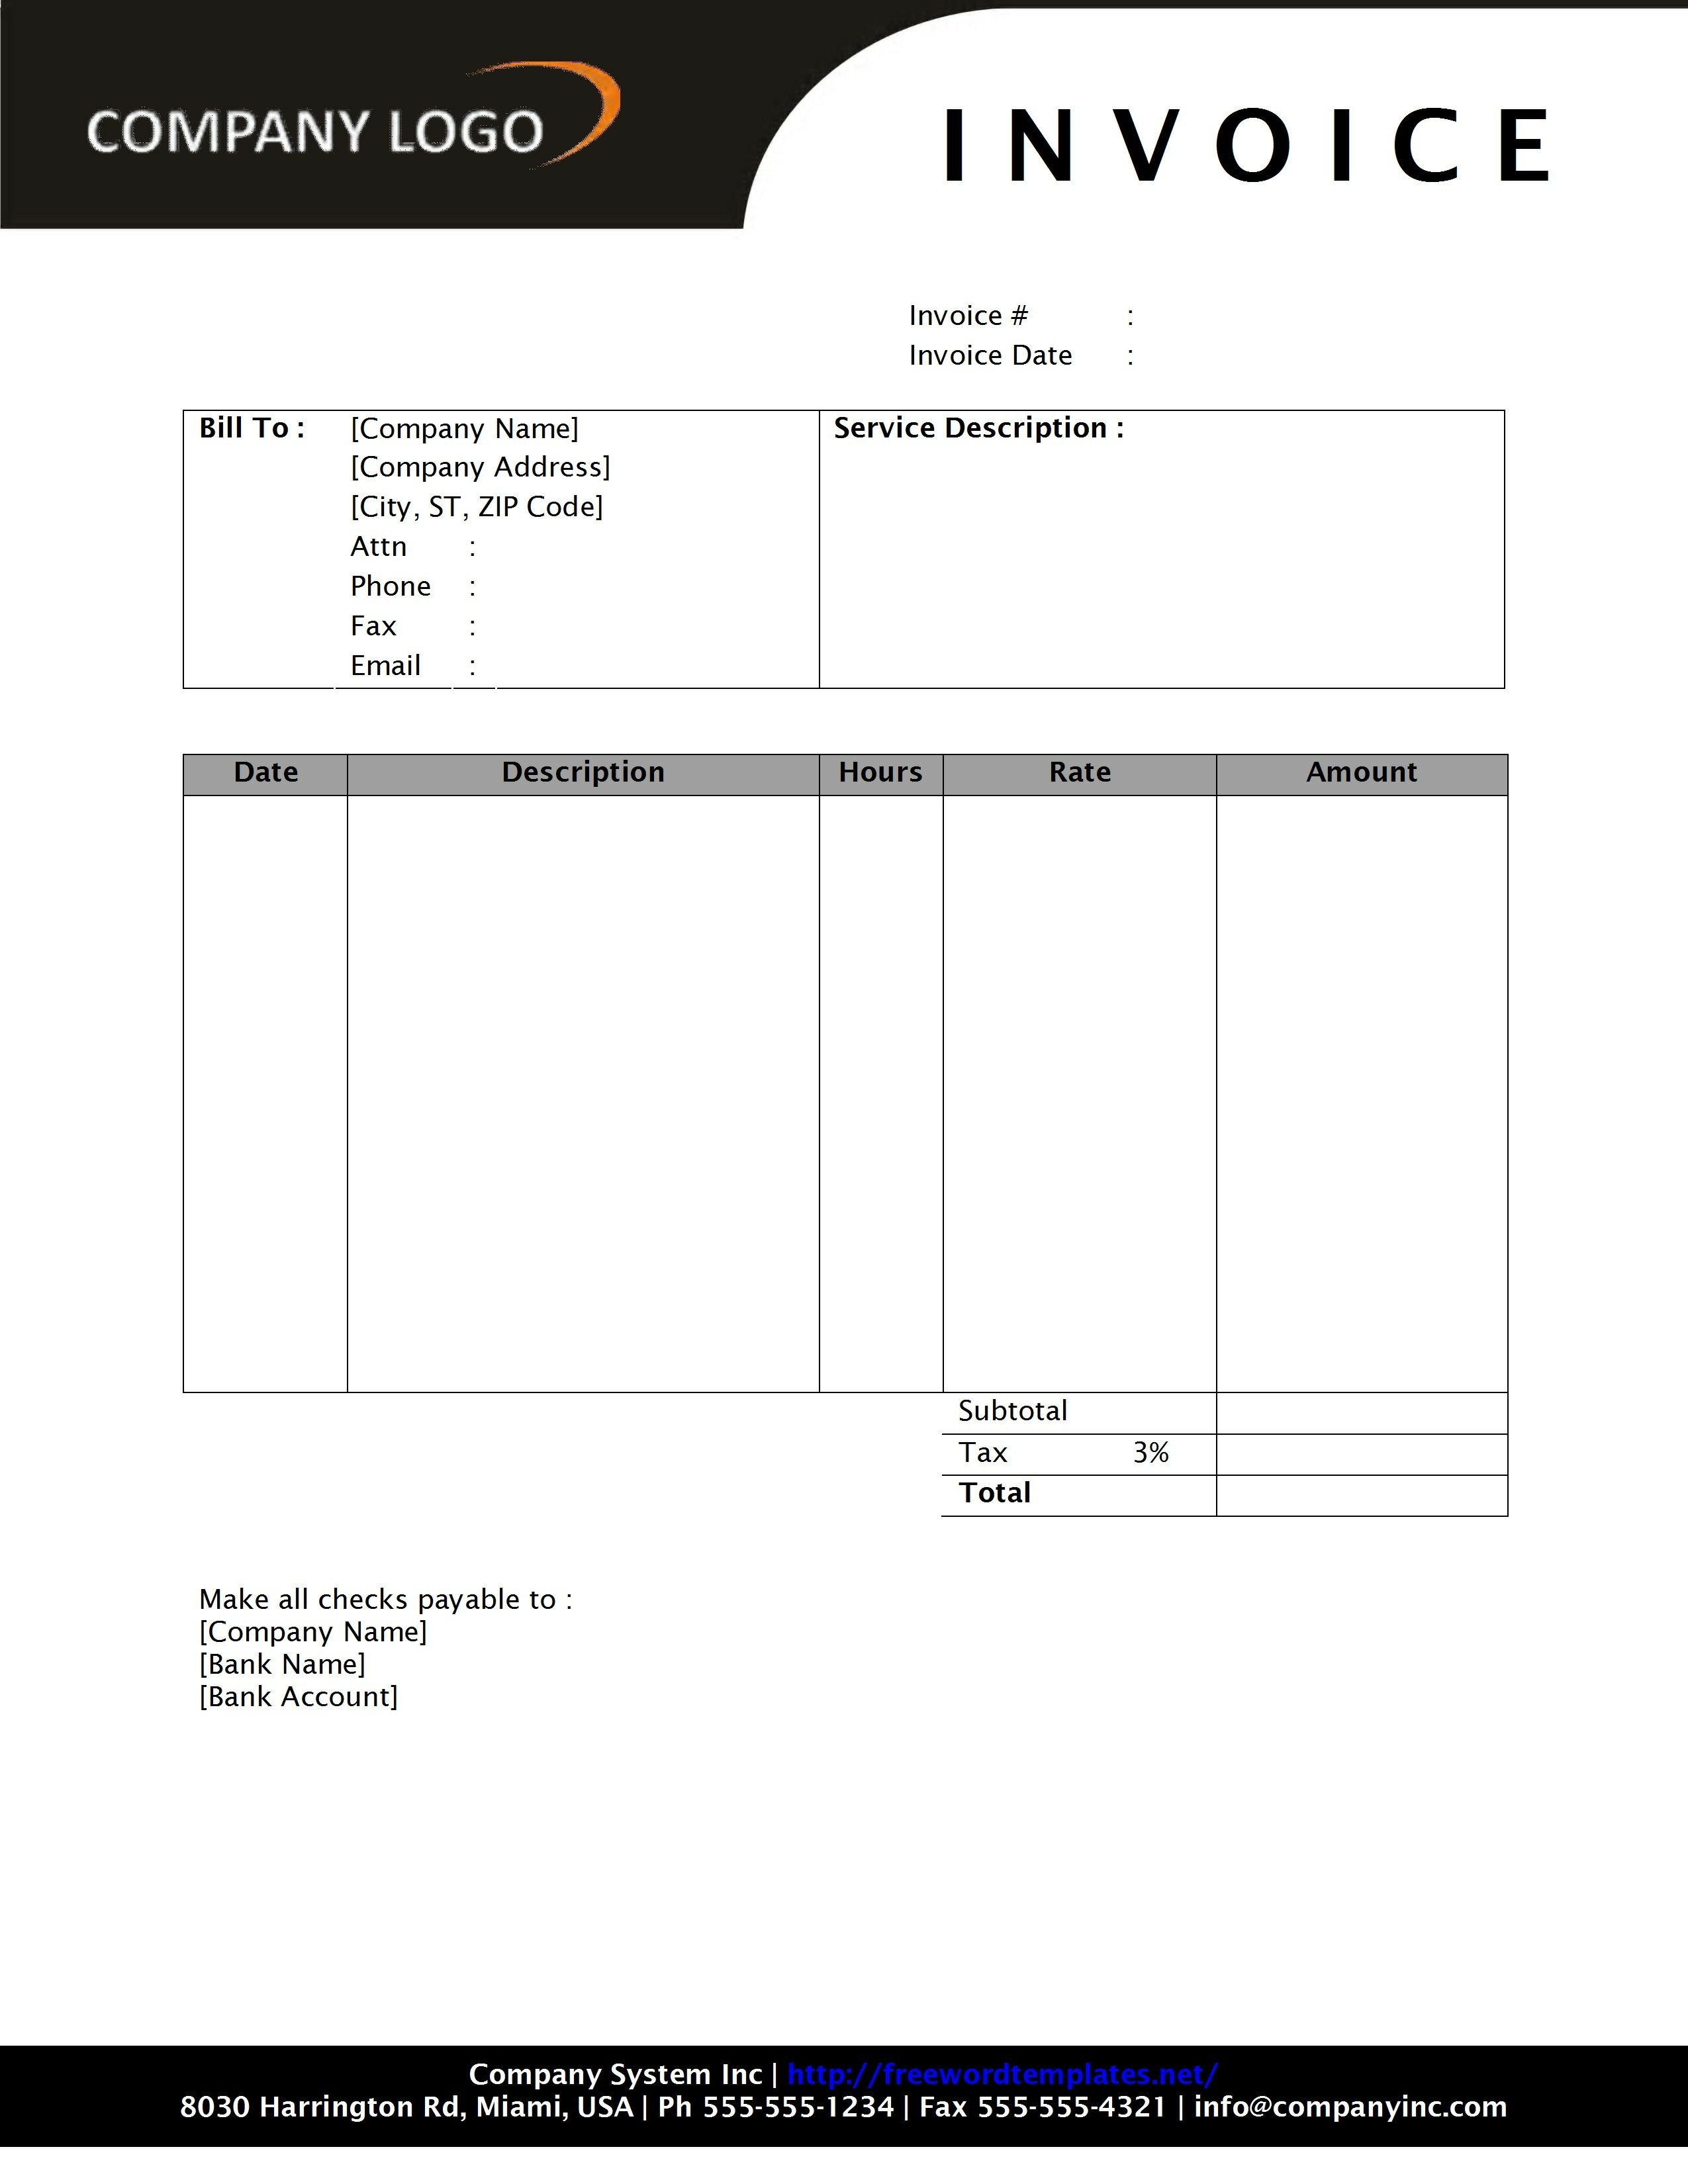 Download Free Invoice Template Uk * Invoice Template Ideas